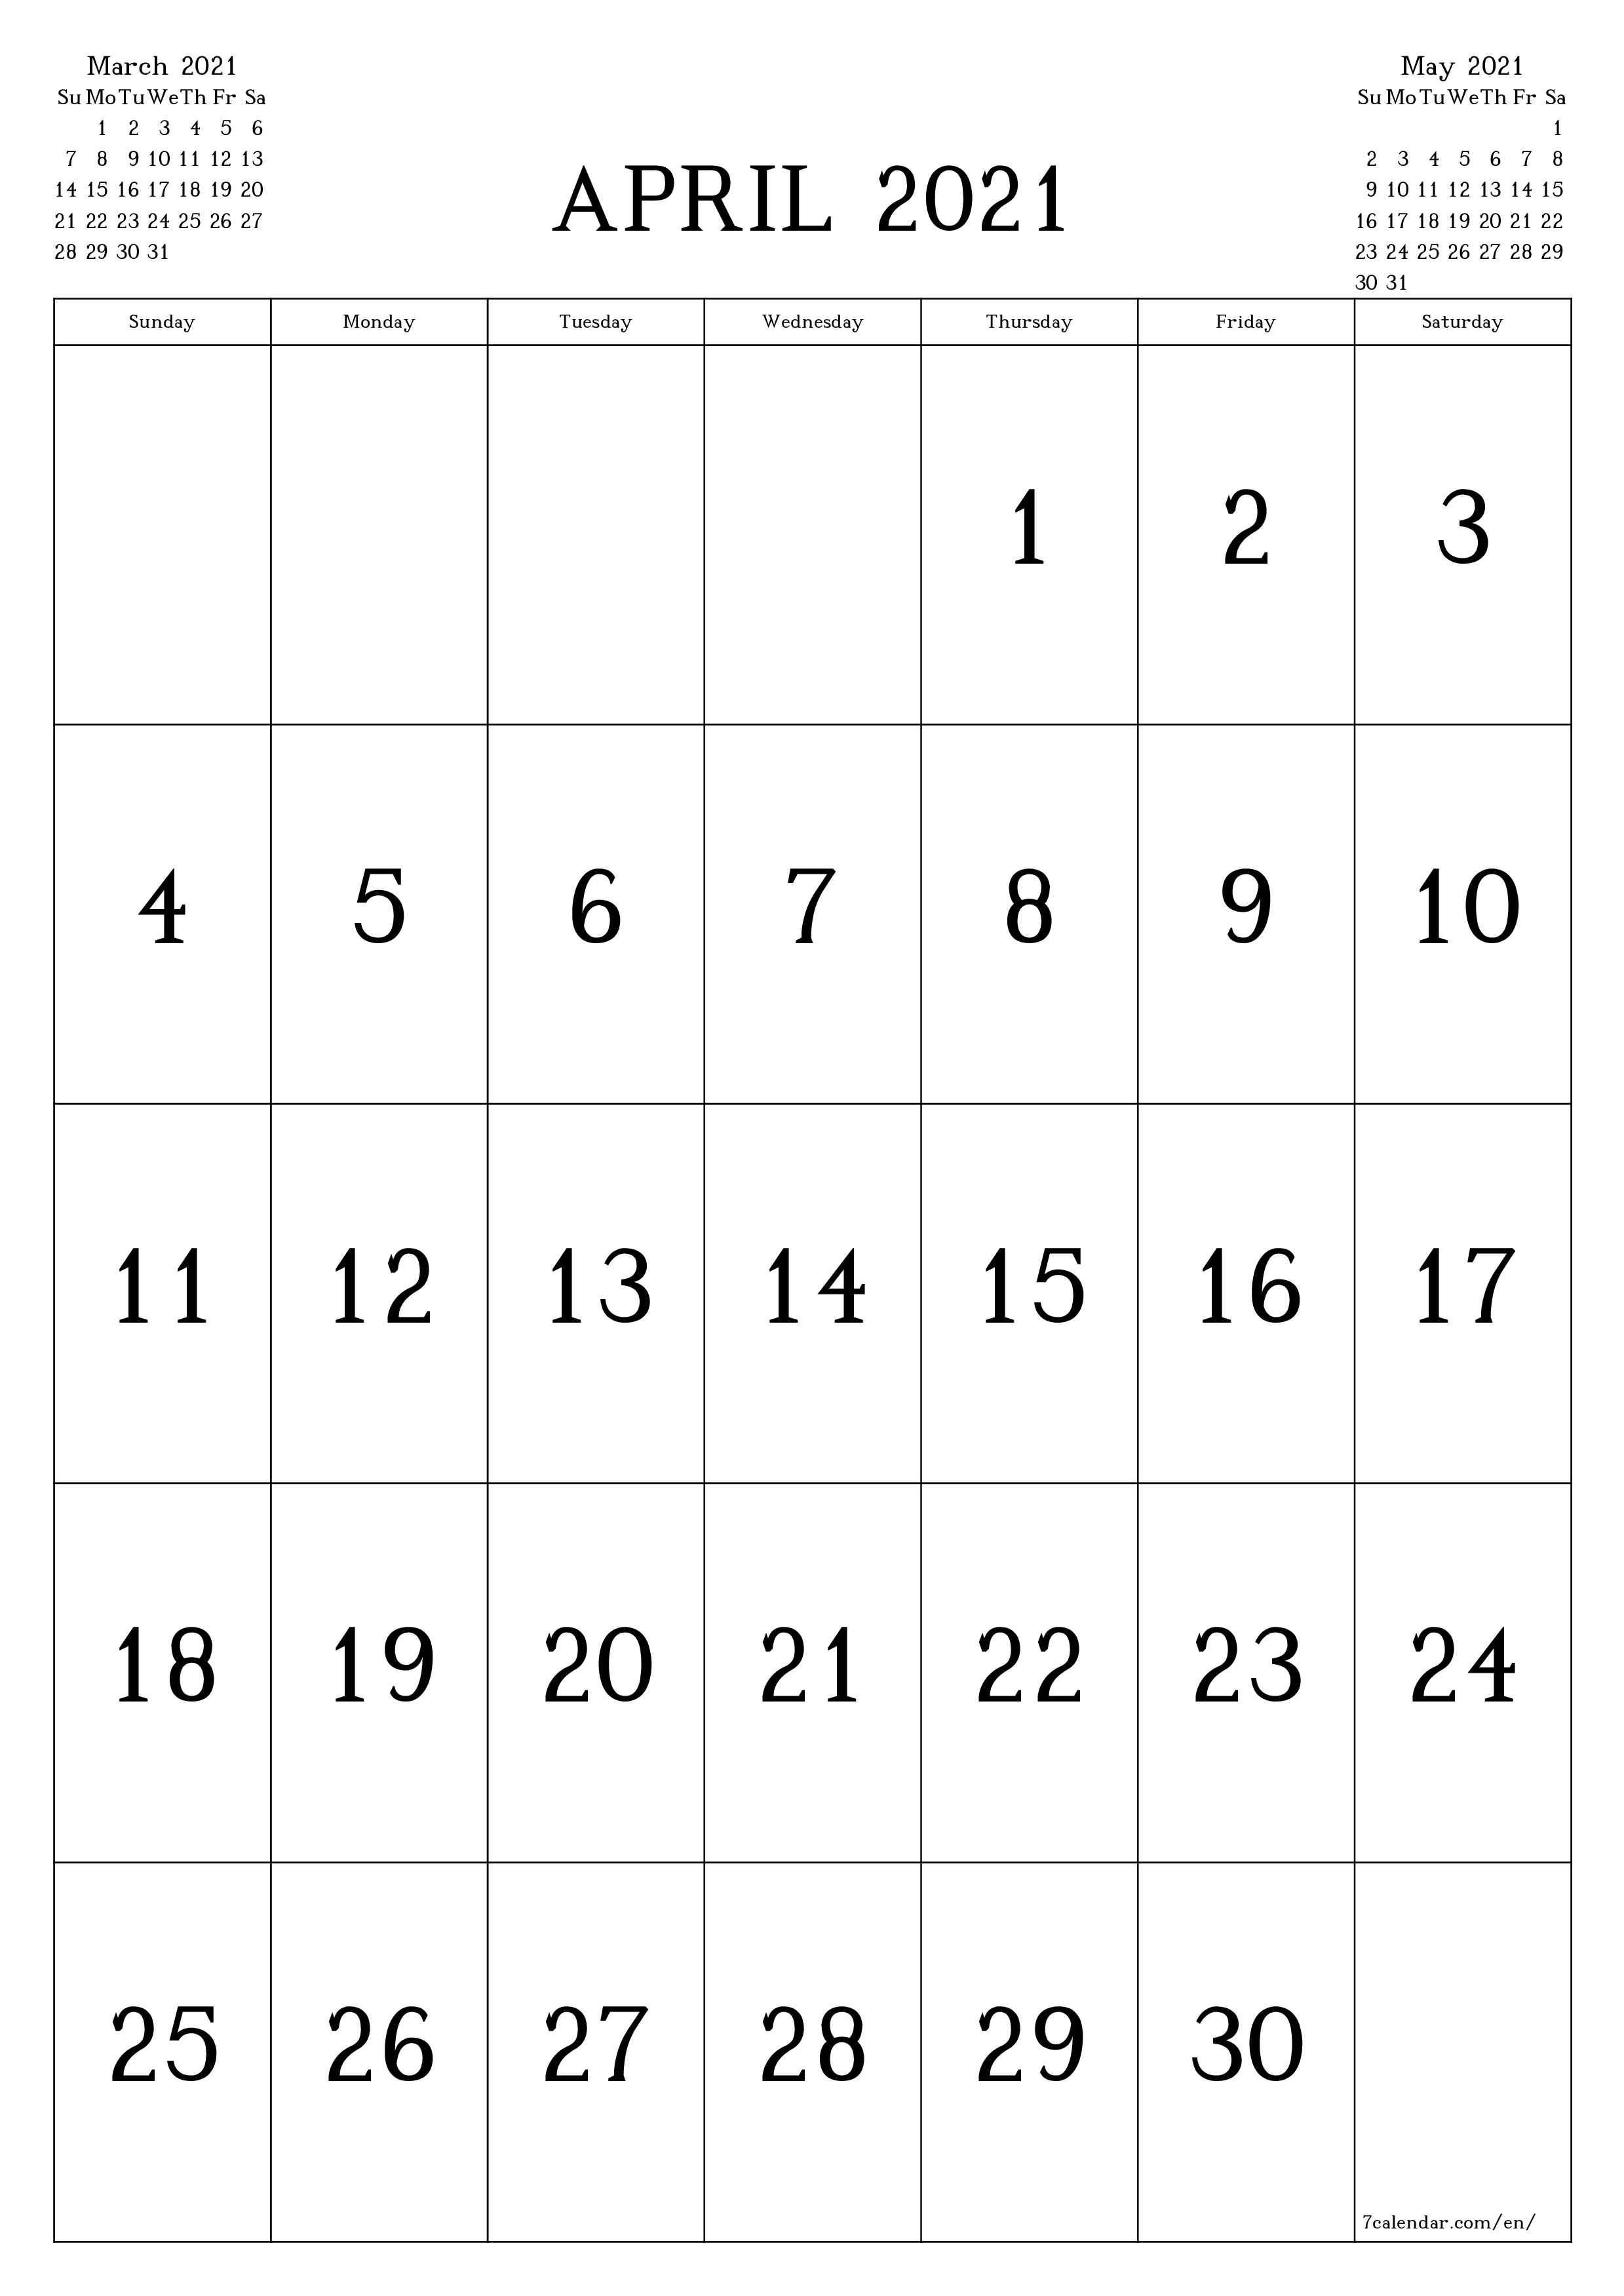 Blank monthly dated HD template image of calendar for month April 2021 save and print to PDF PNG English - 7calendar.com